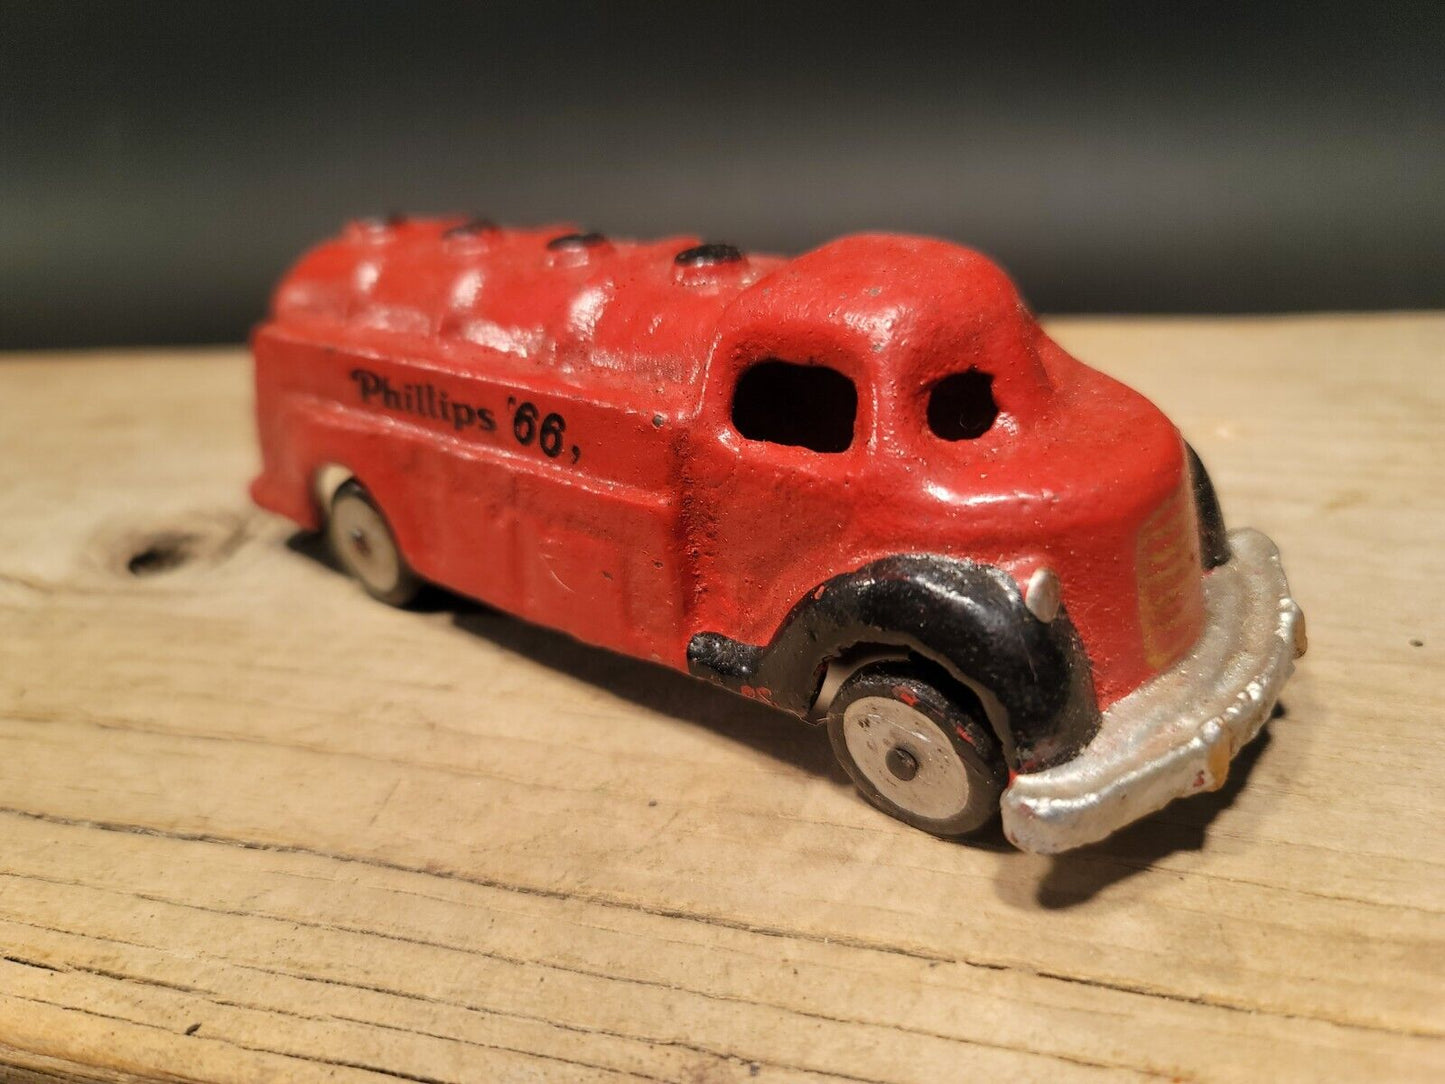 Antique Vintage Style Red Cast Iron Toy Phillips 66 Car Delivery Van